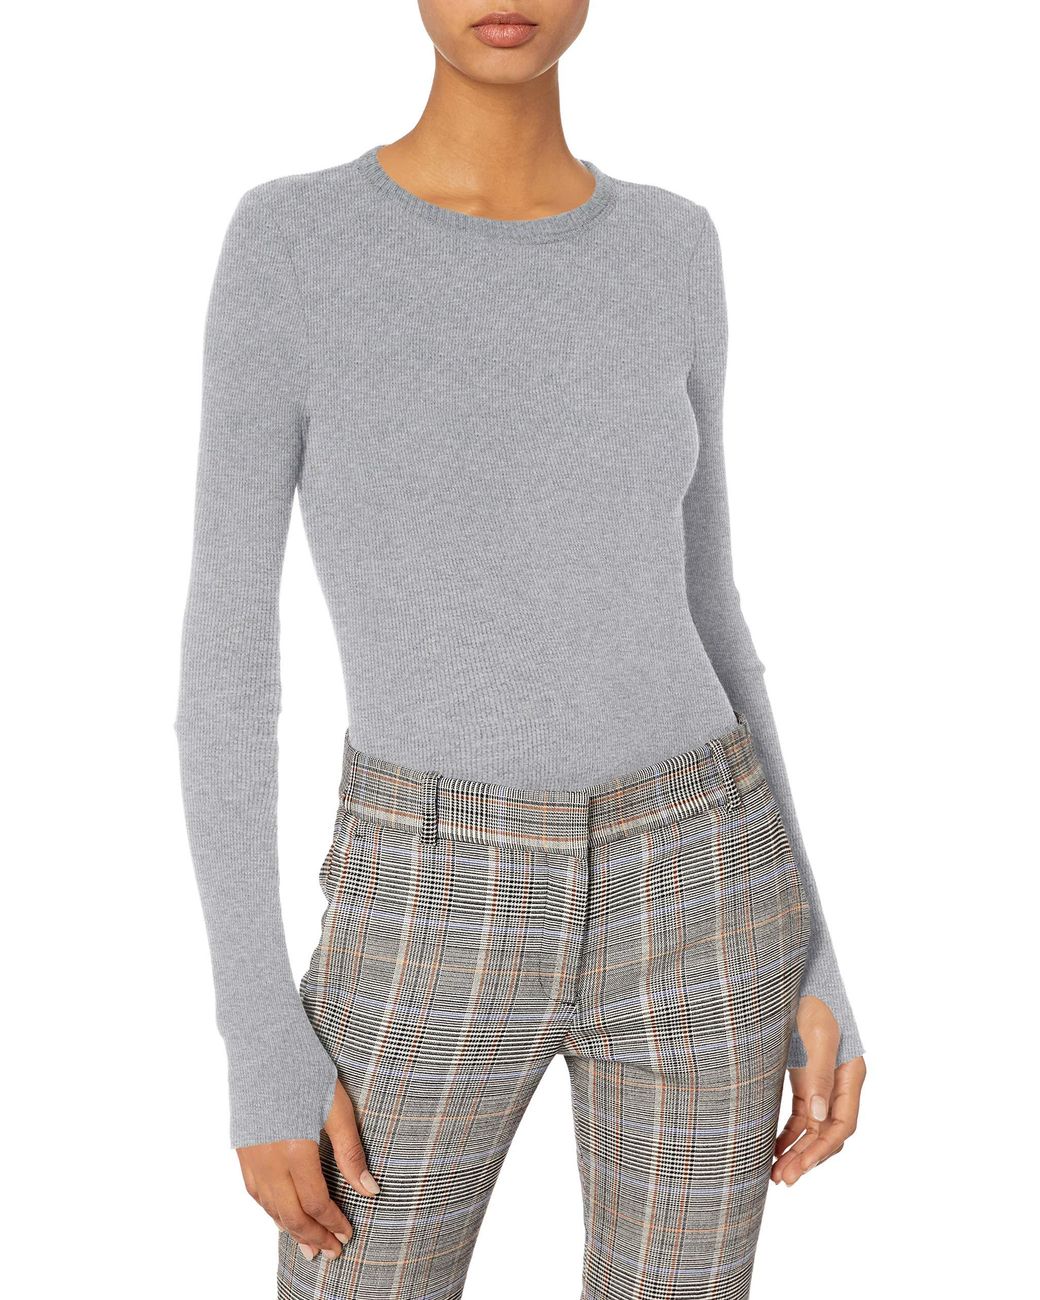 Enza Costa Cashmere Thermal Cuffed Crew Top in Smoke (Gray) - Lyst